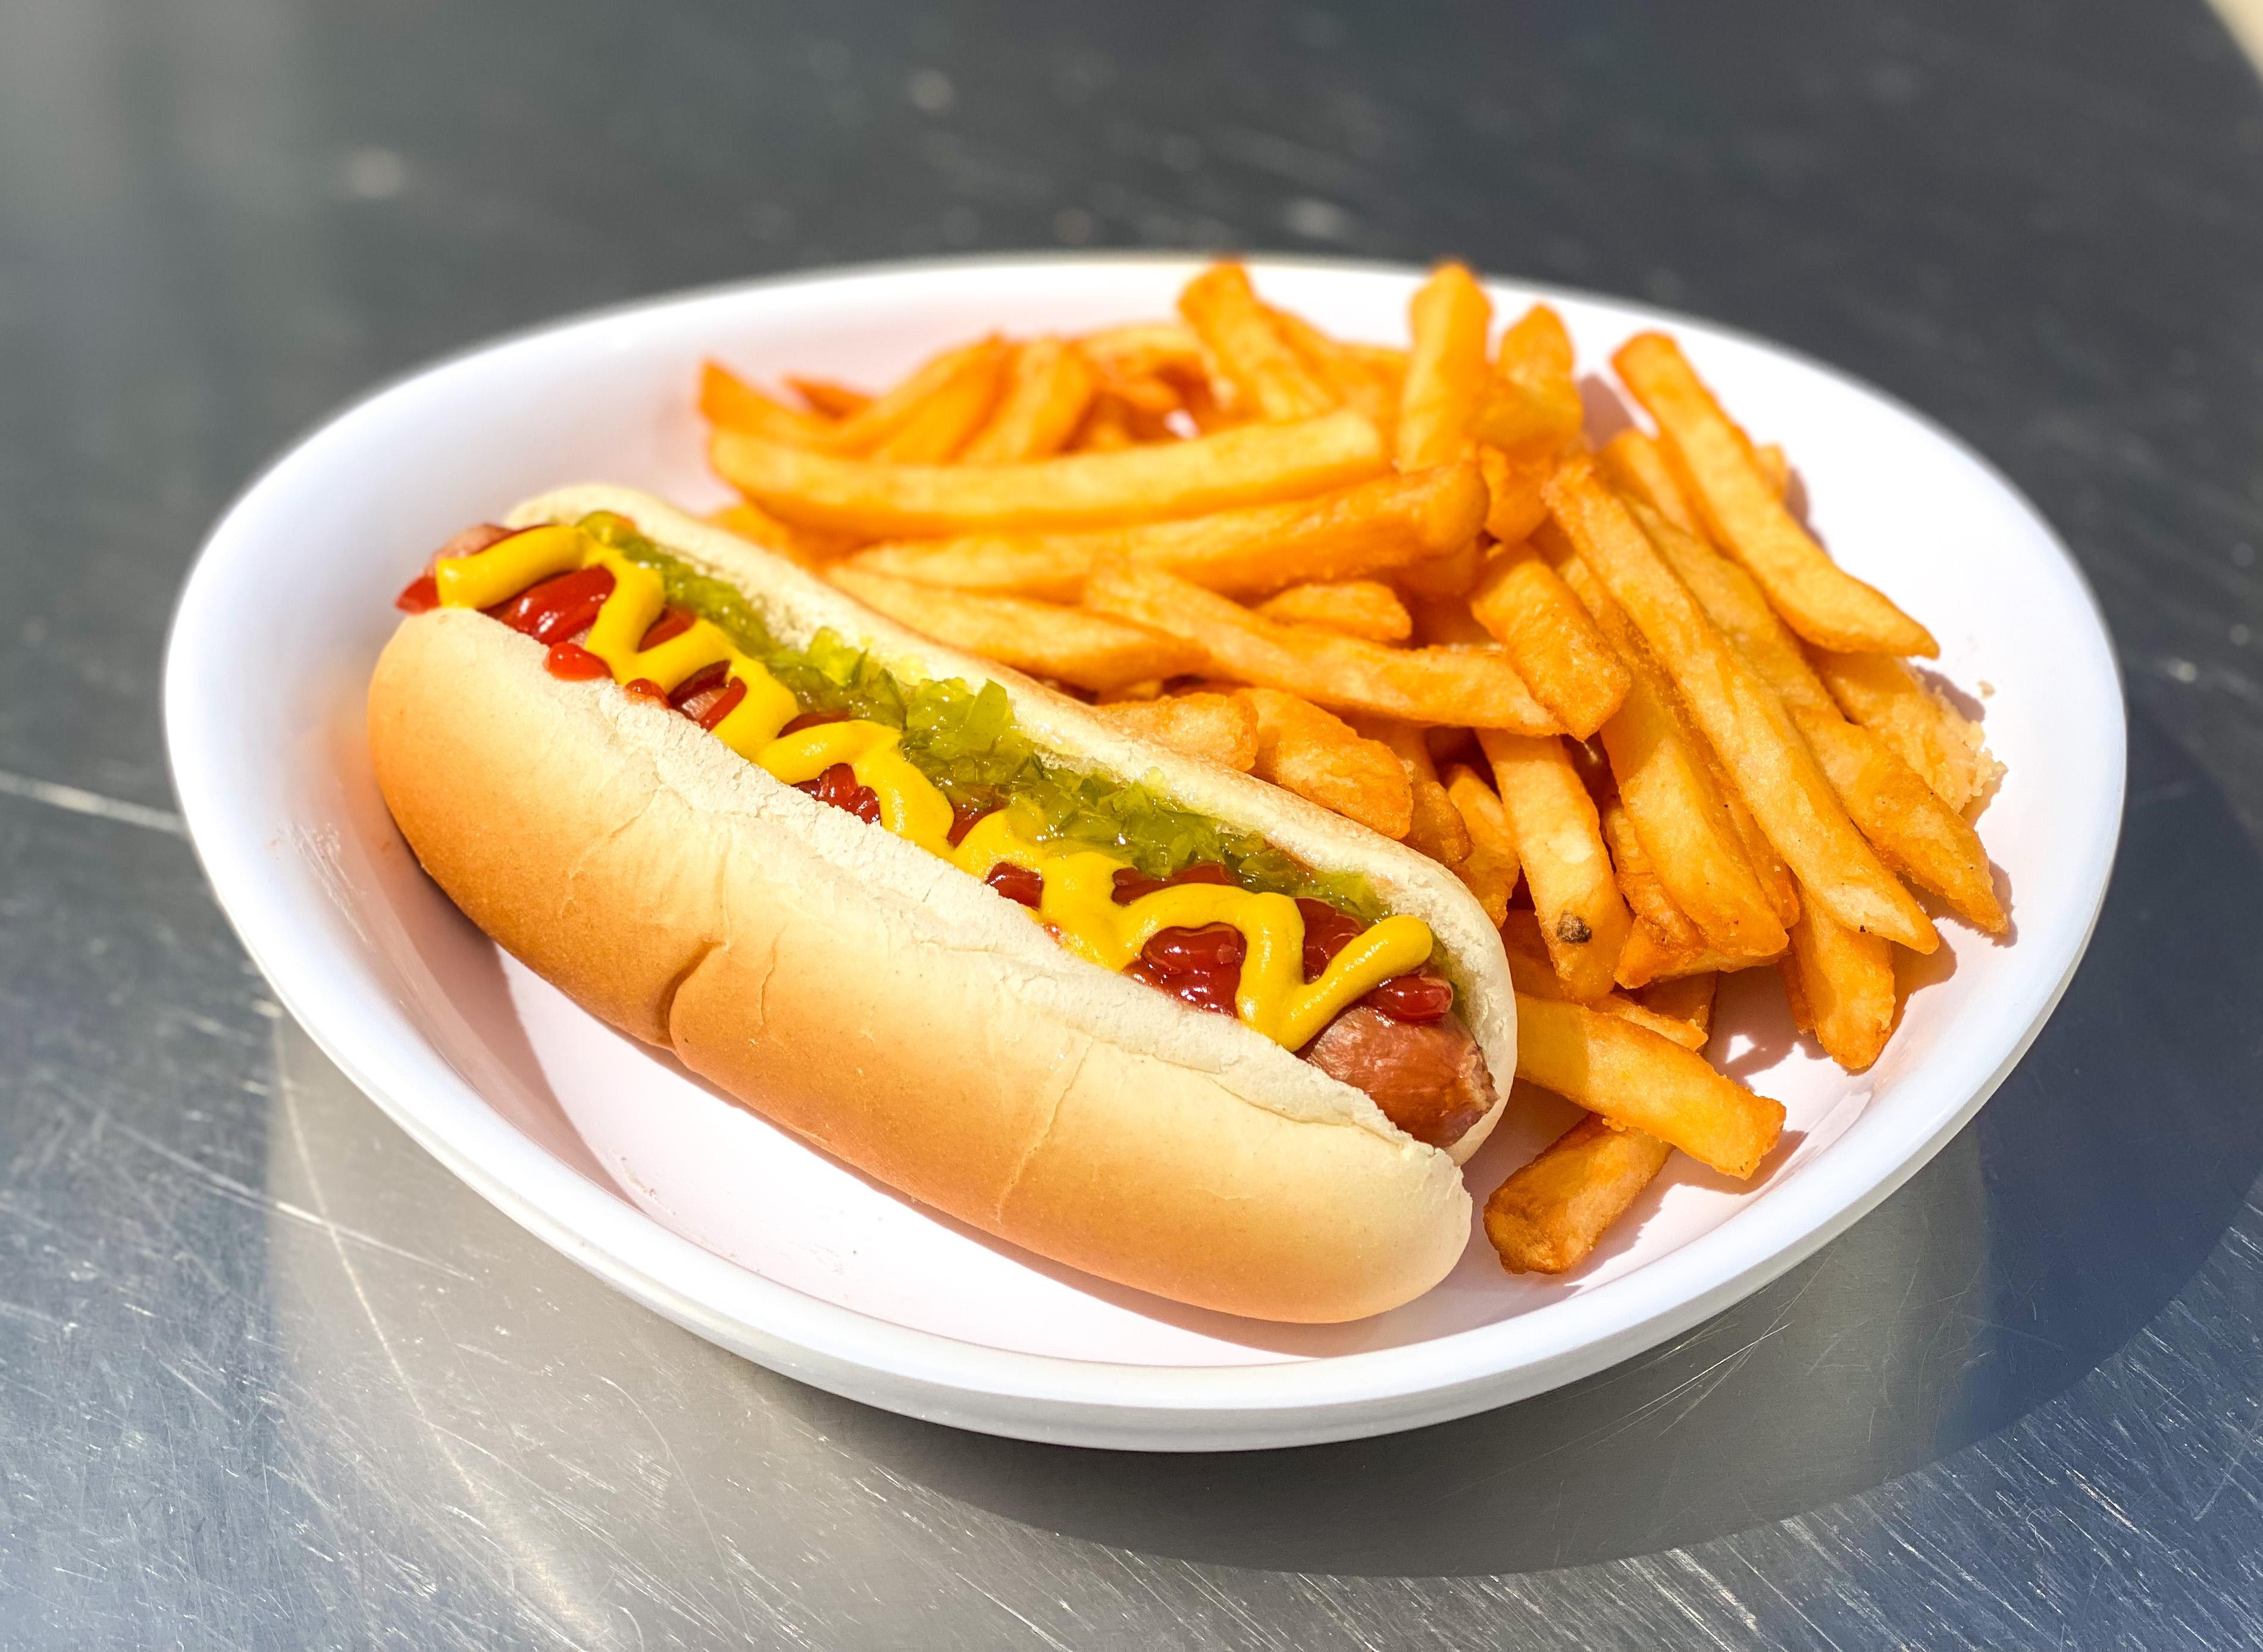 #4 Dearborn Brand Hot Dog Meal